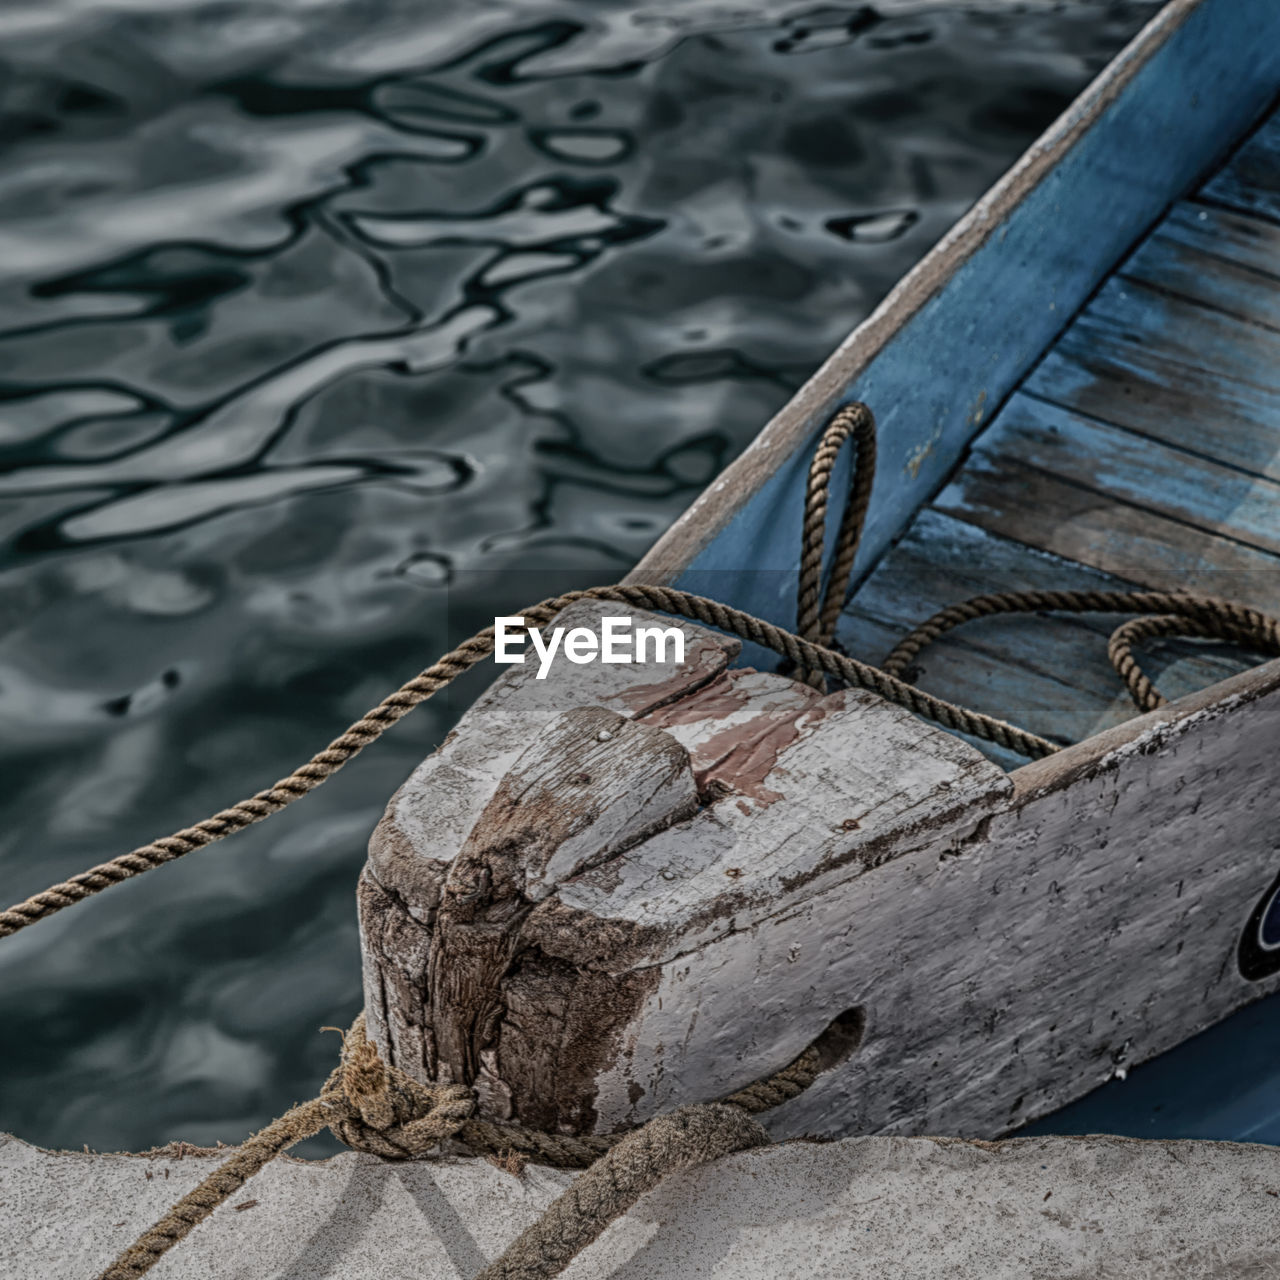 HIGH ANGLE VIEW OF ROPE TIED ON WOODEN BOAT